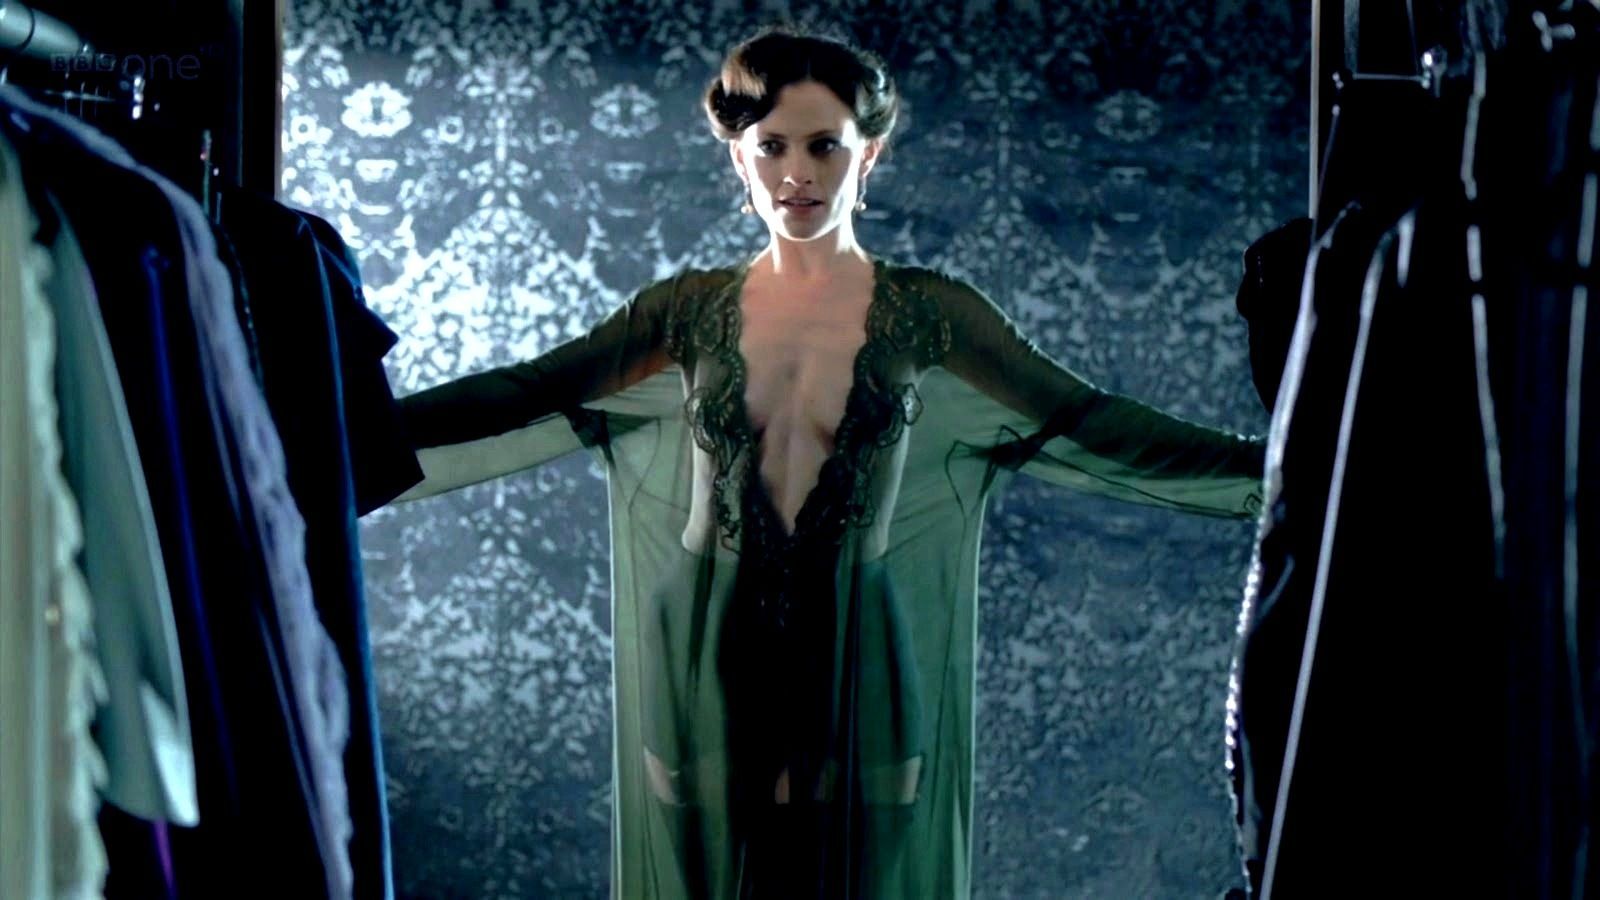 irene adler, I wish to be just like you.